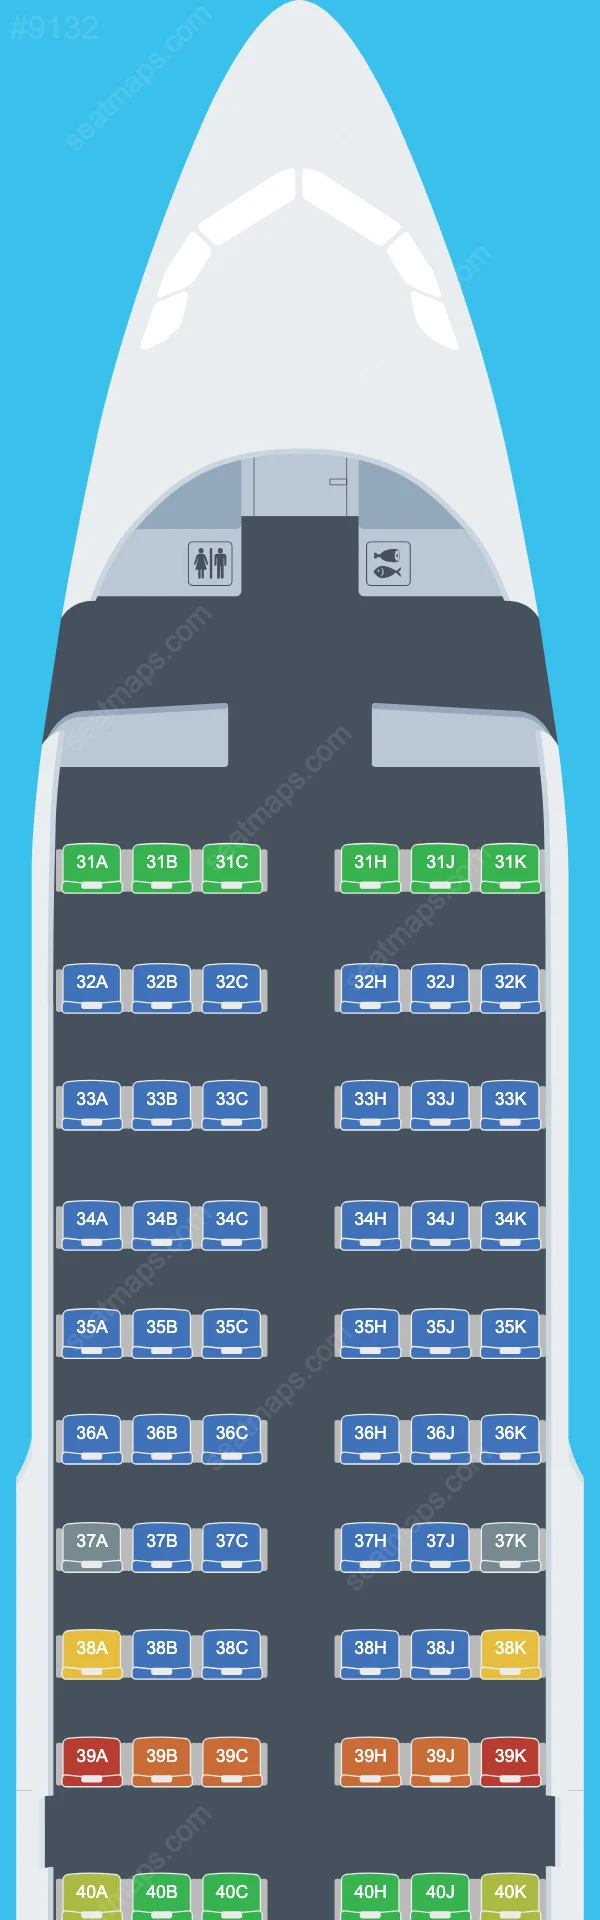 China Southern Airbus A319 Seat Maps A319-100 V.5